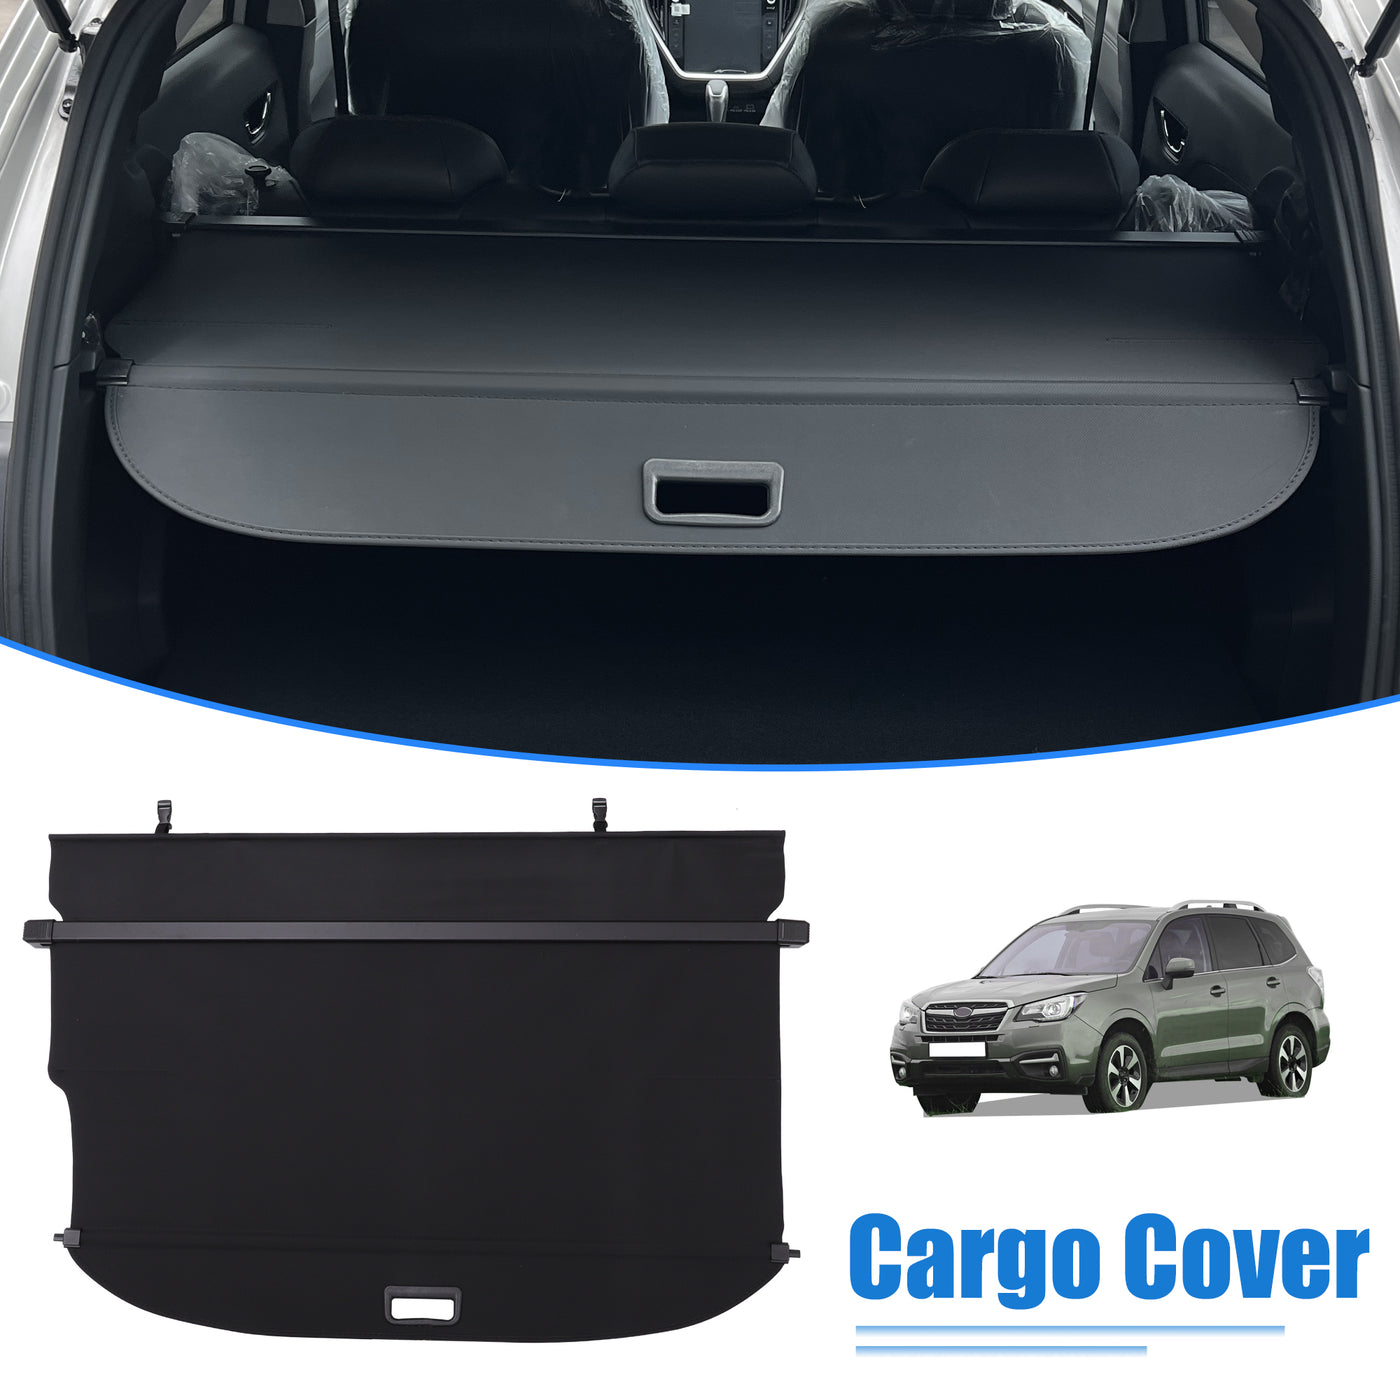 uxcell Uxcell Retractable Cargo Cover for Subaru Forester Waterproof Non Slip SUV Rear Trunk Shielding Shade Black